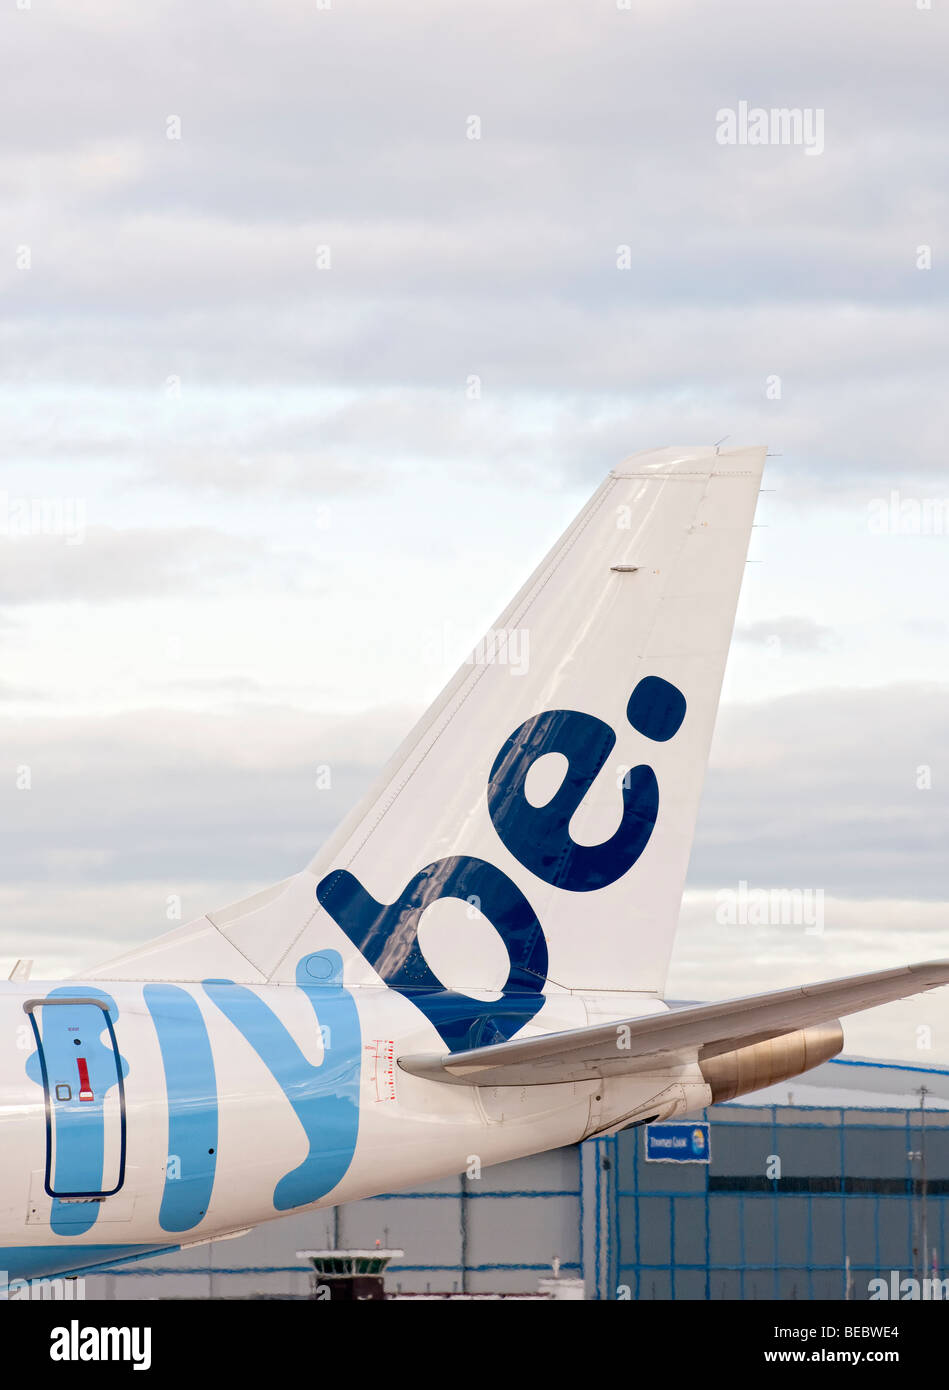 Tail fin of a FlyBE aircraft as it taxis for take off from Manchester Airport (Ringway Airport) in Manchester, England Stock Photo